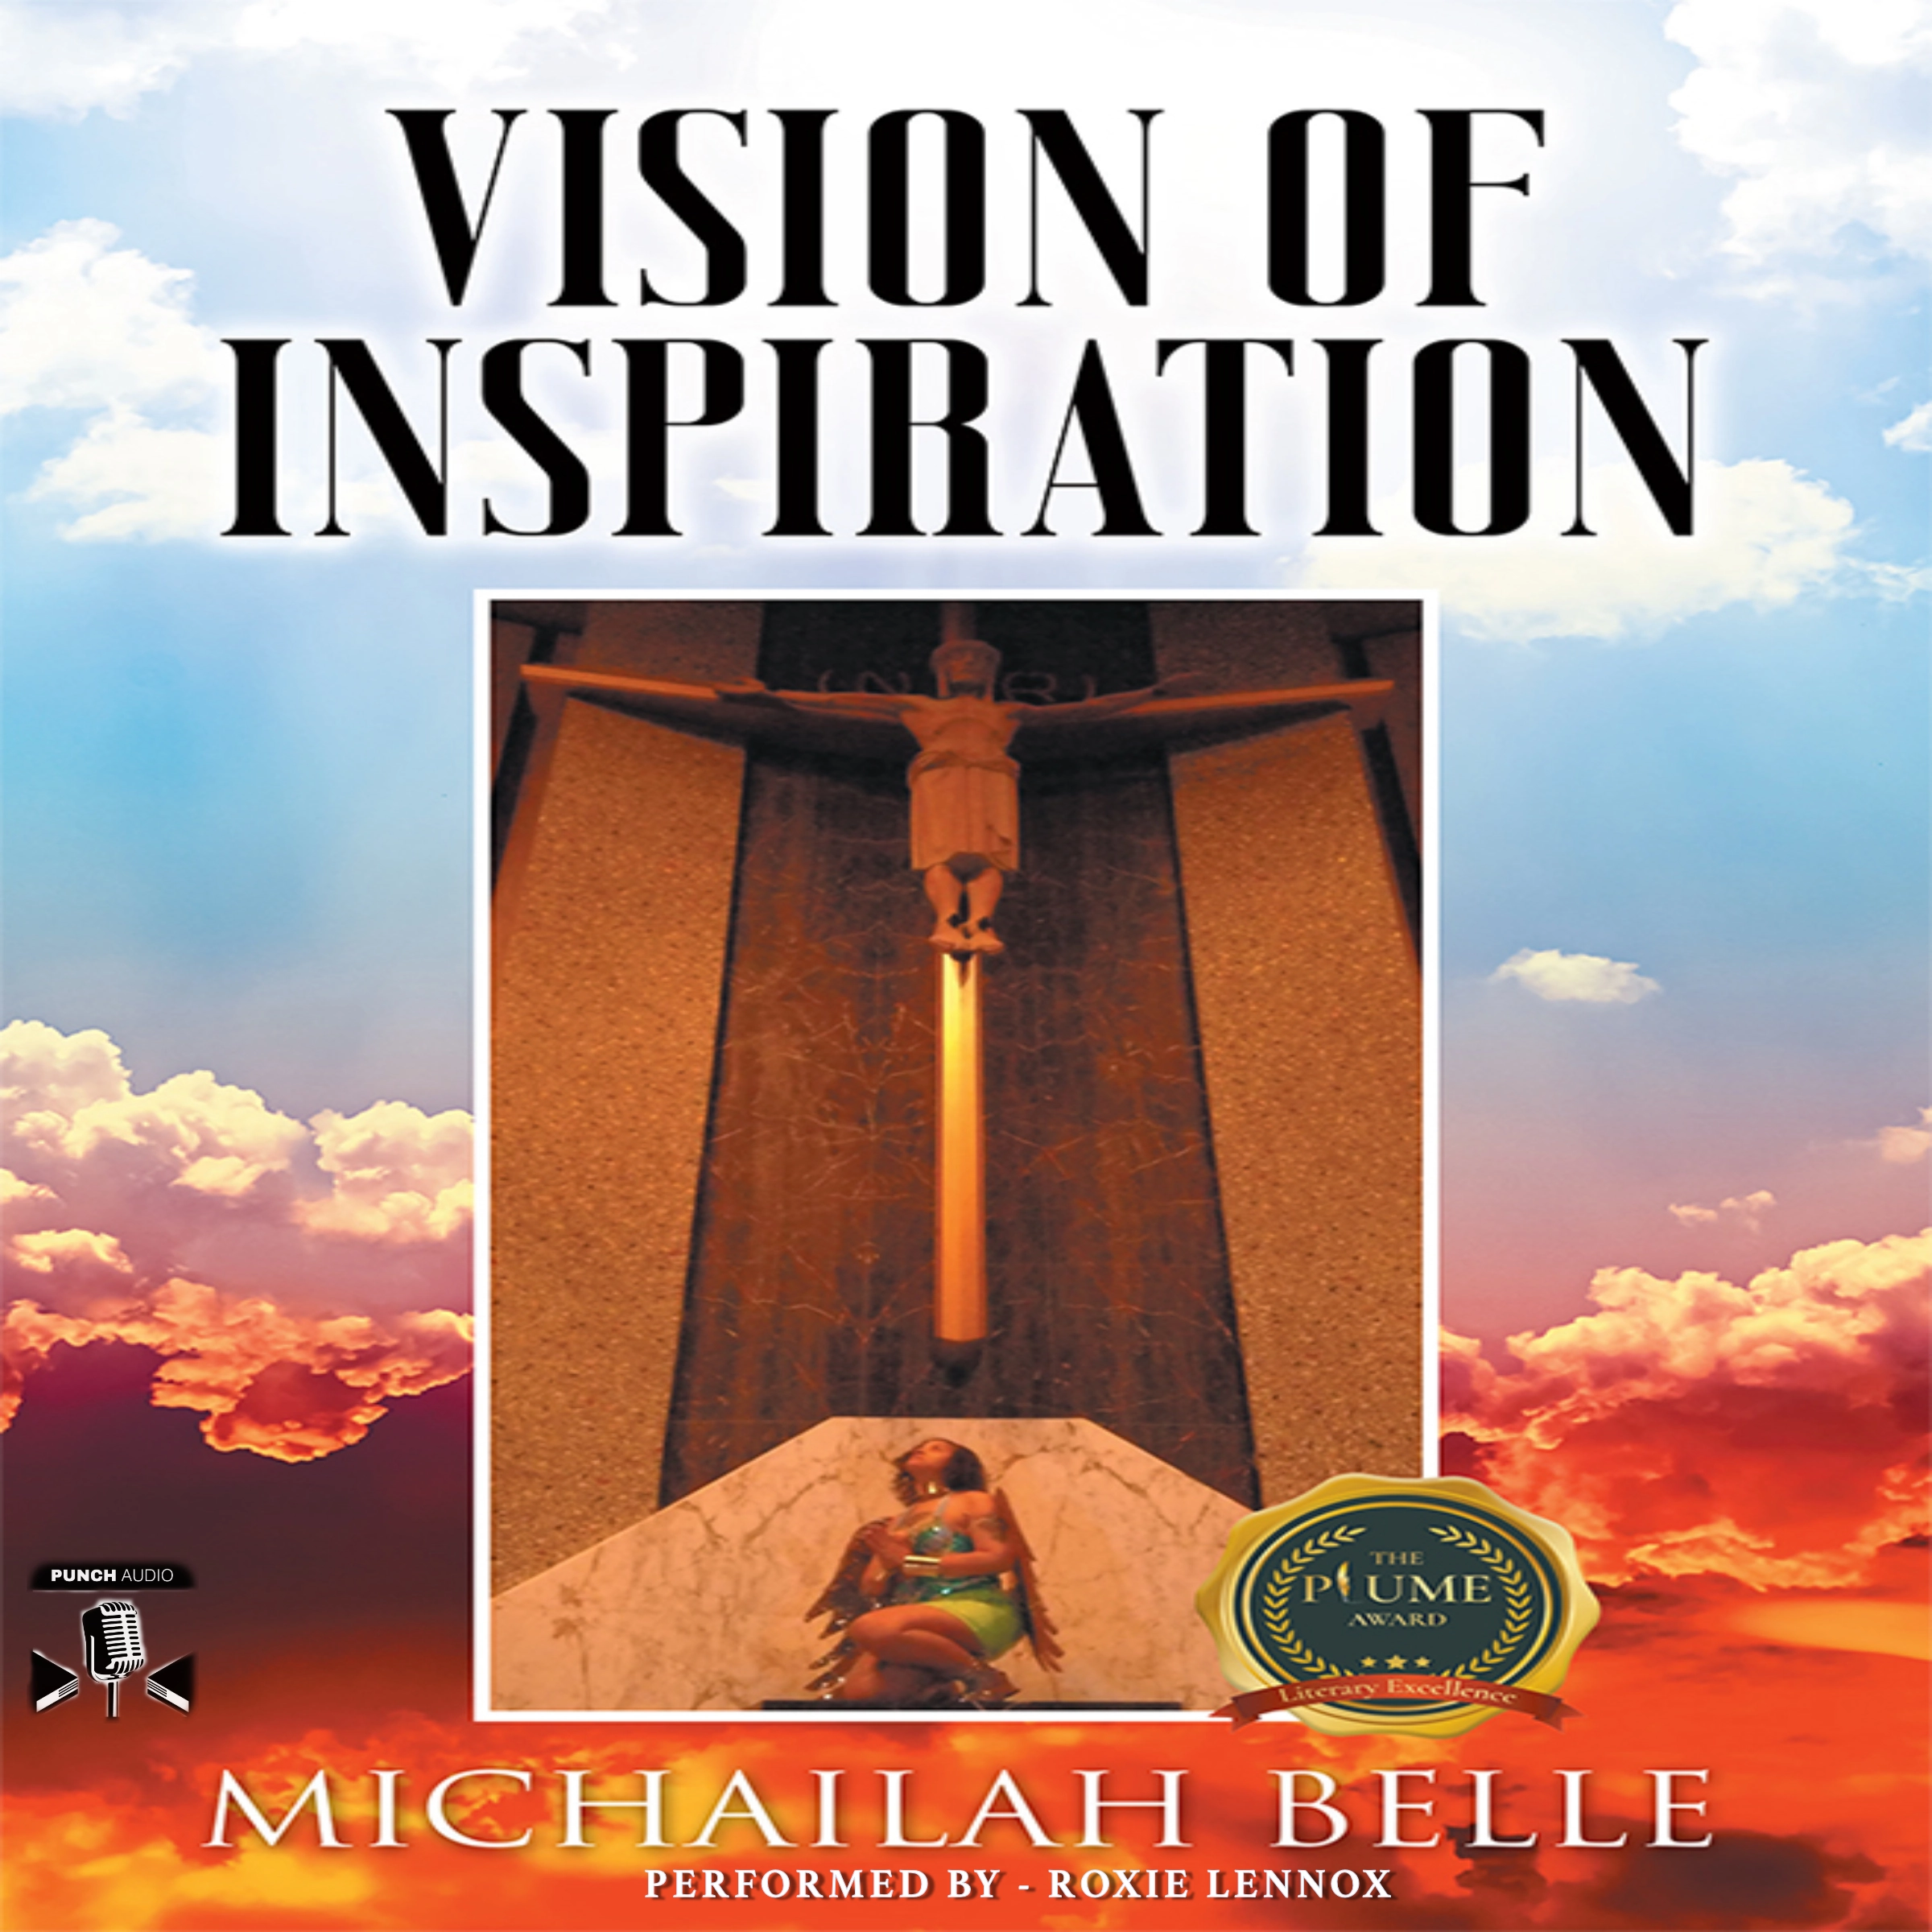 Vision of Inspiration by Michailah Belle Audiobook